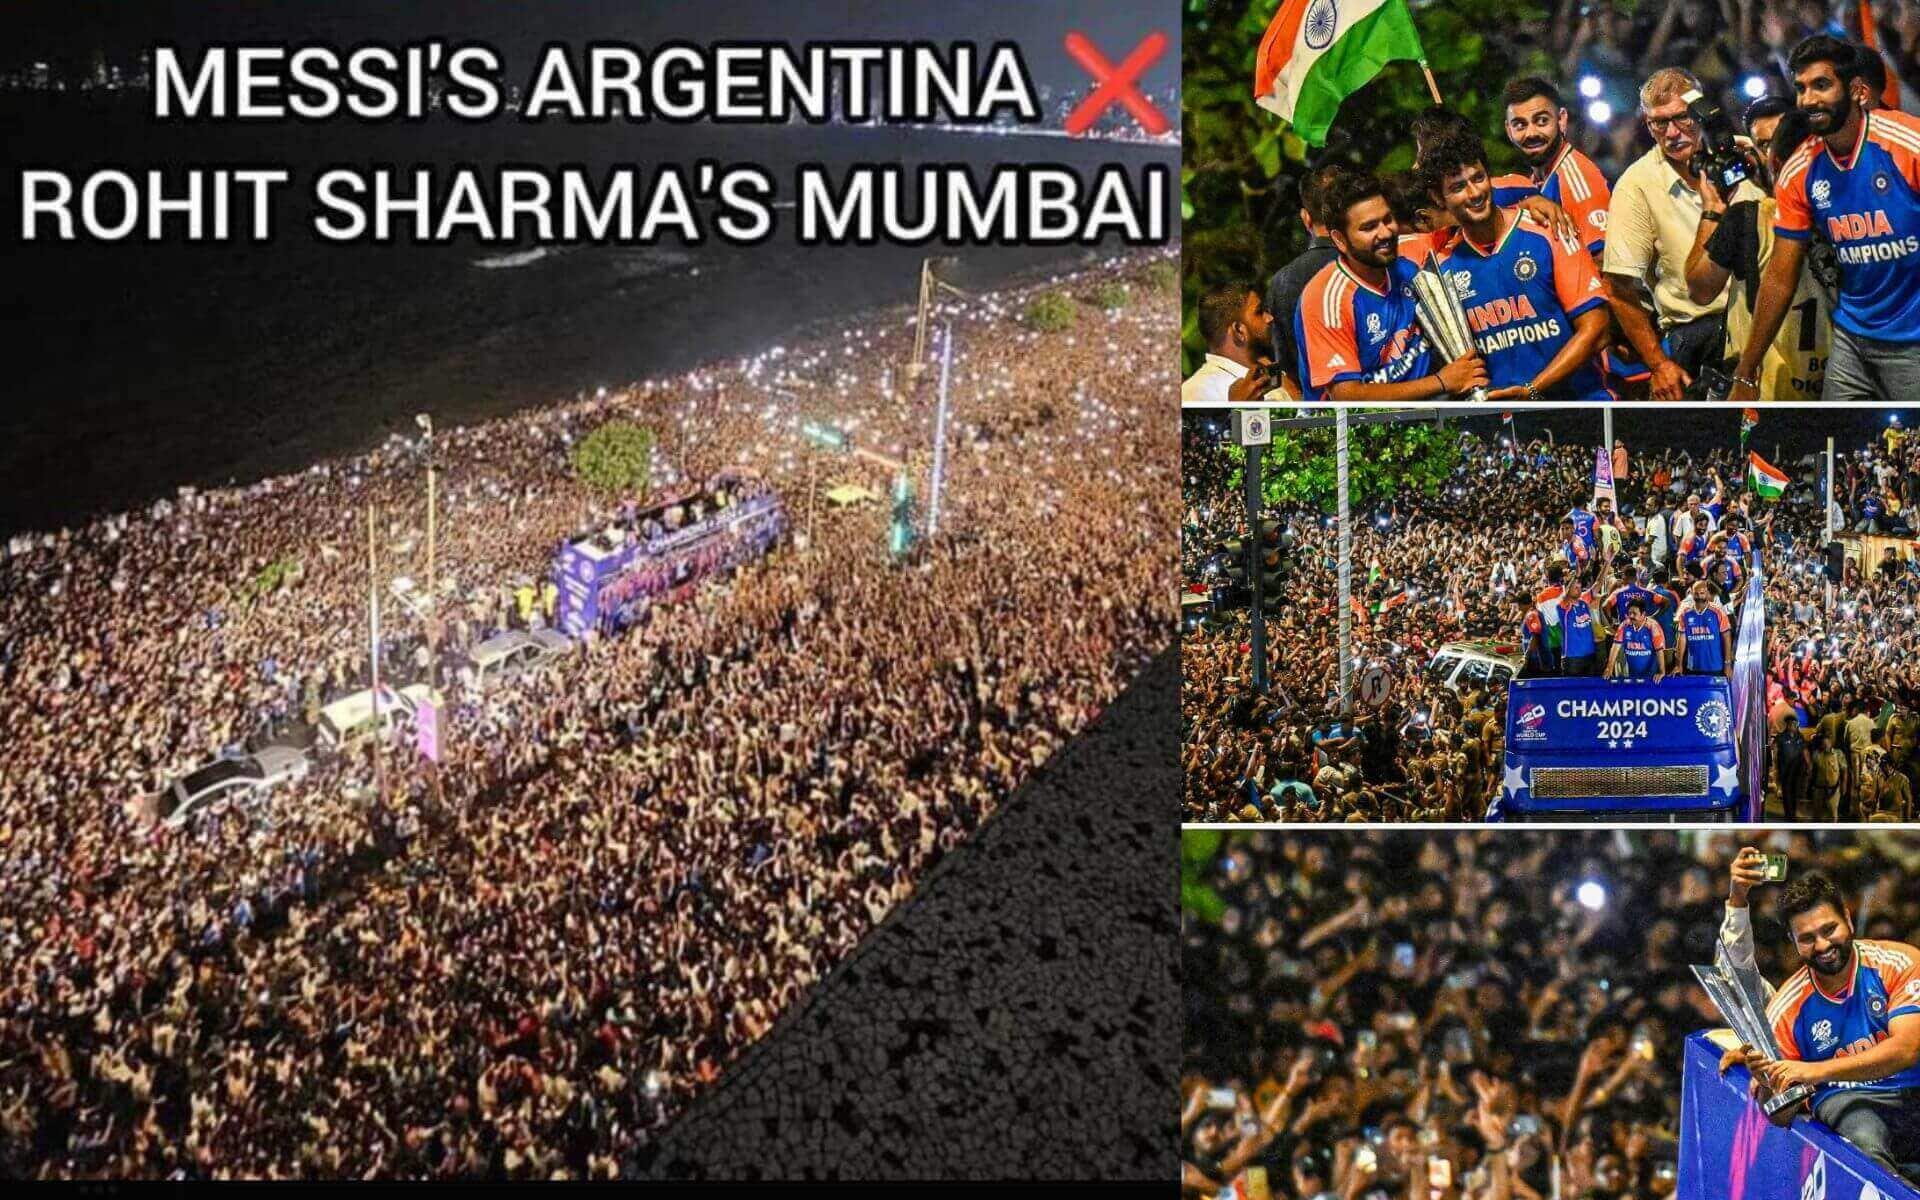 'Messi, Argentina You Lost To India' - Netizens Make Insane Claims After IND's Victory Parade 